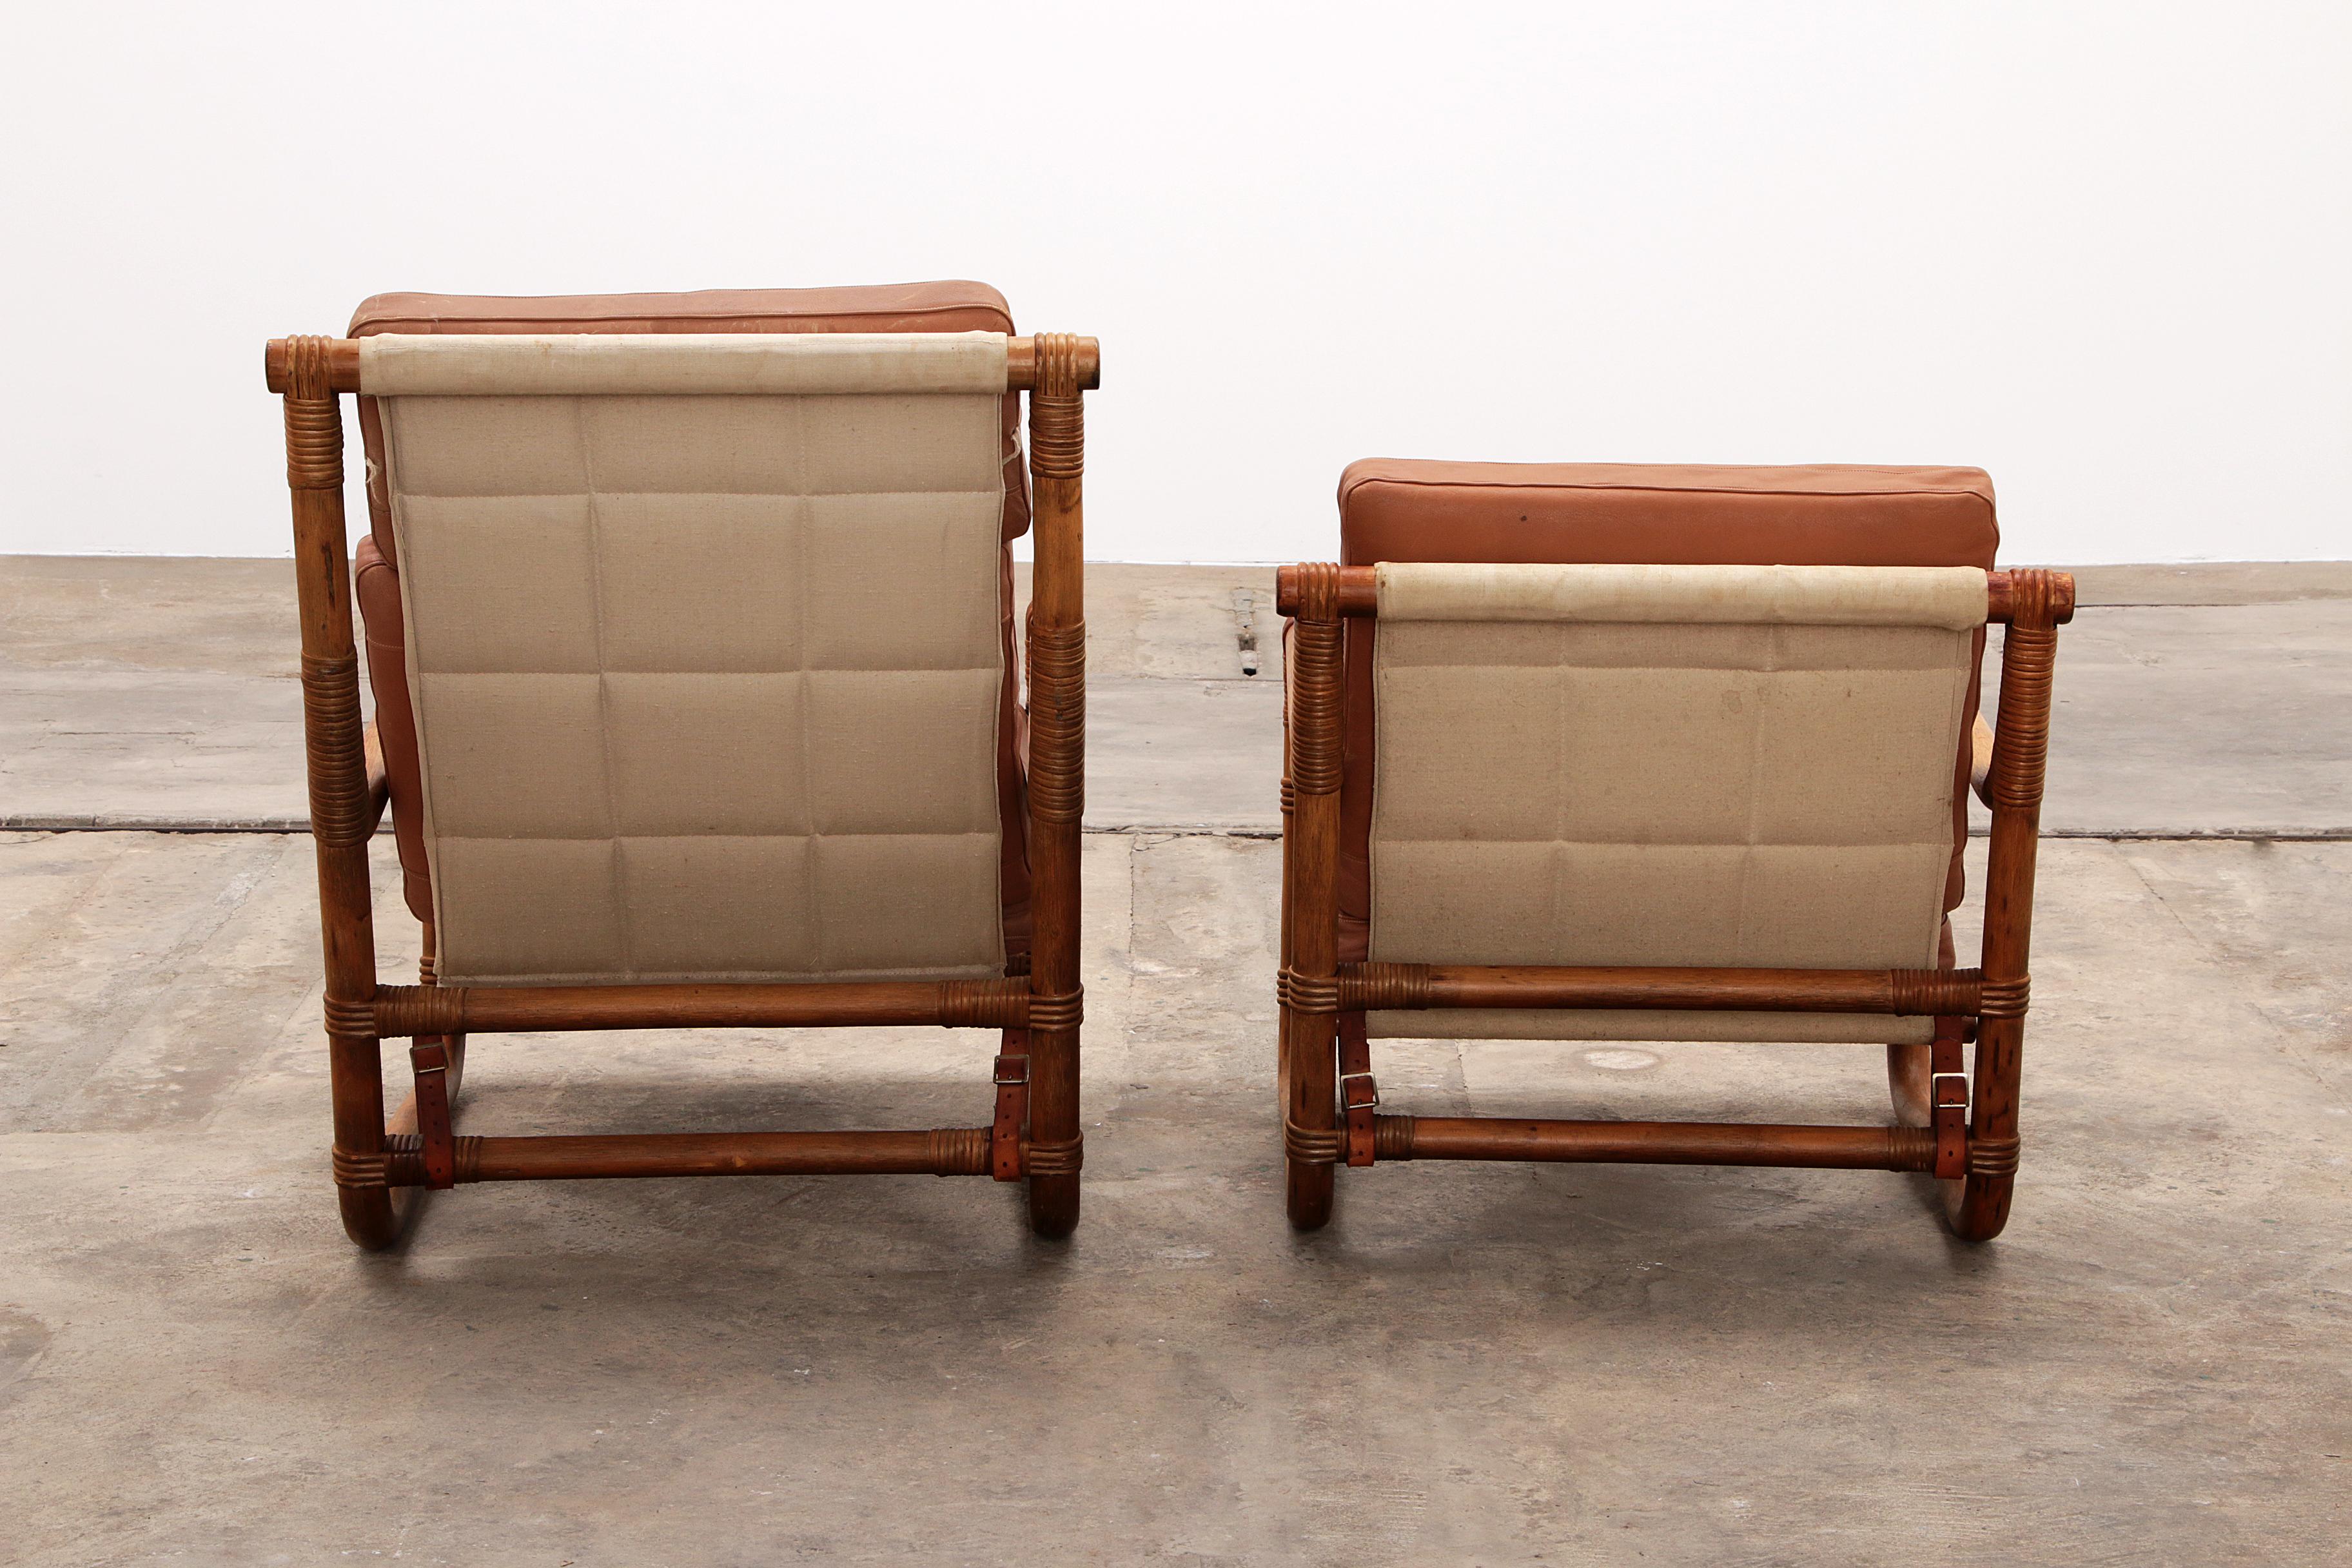 Vintage Bamboo garden set with leather cushions, 1970 Norway. For Sale 6